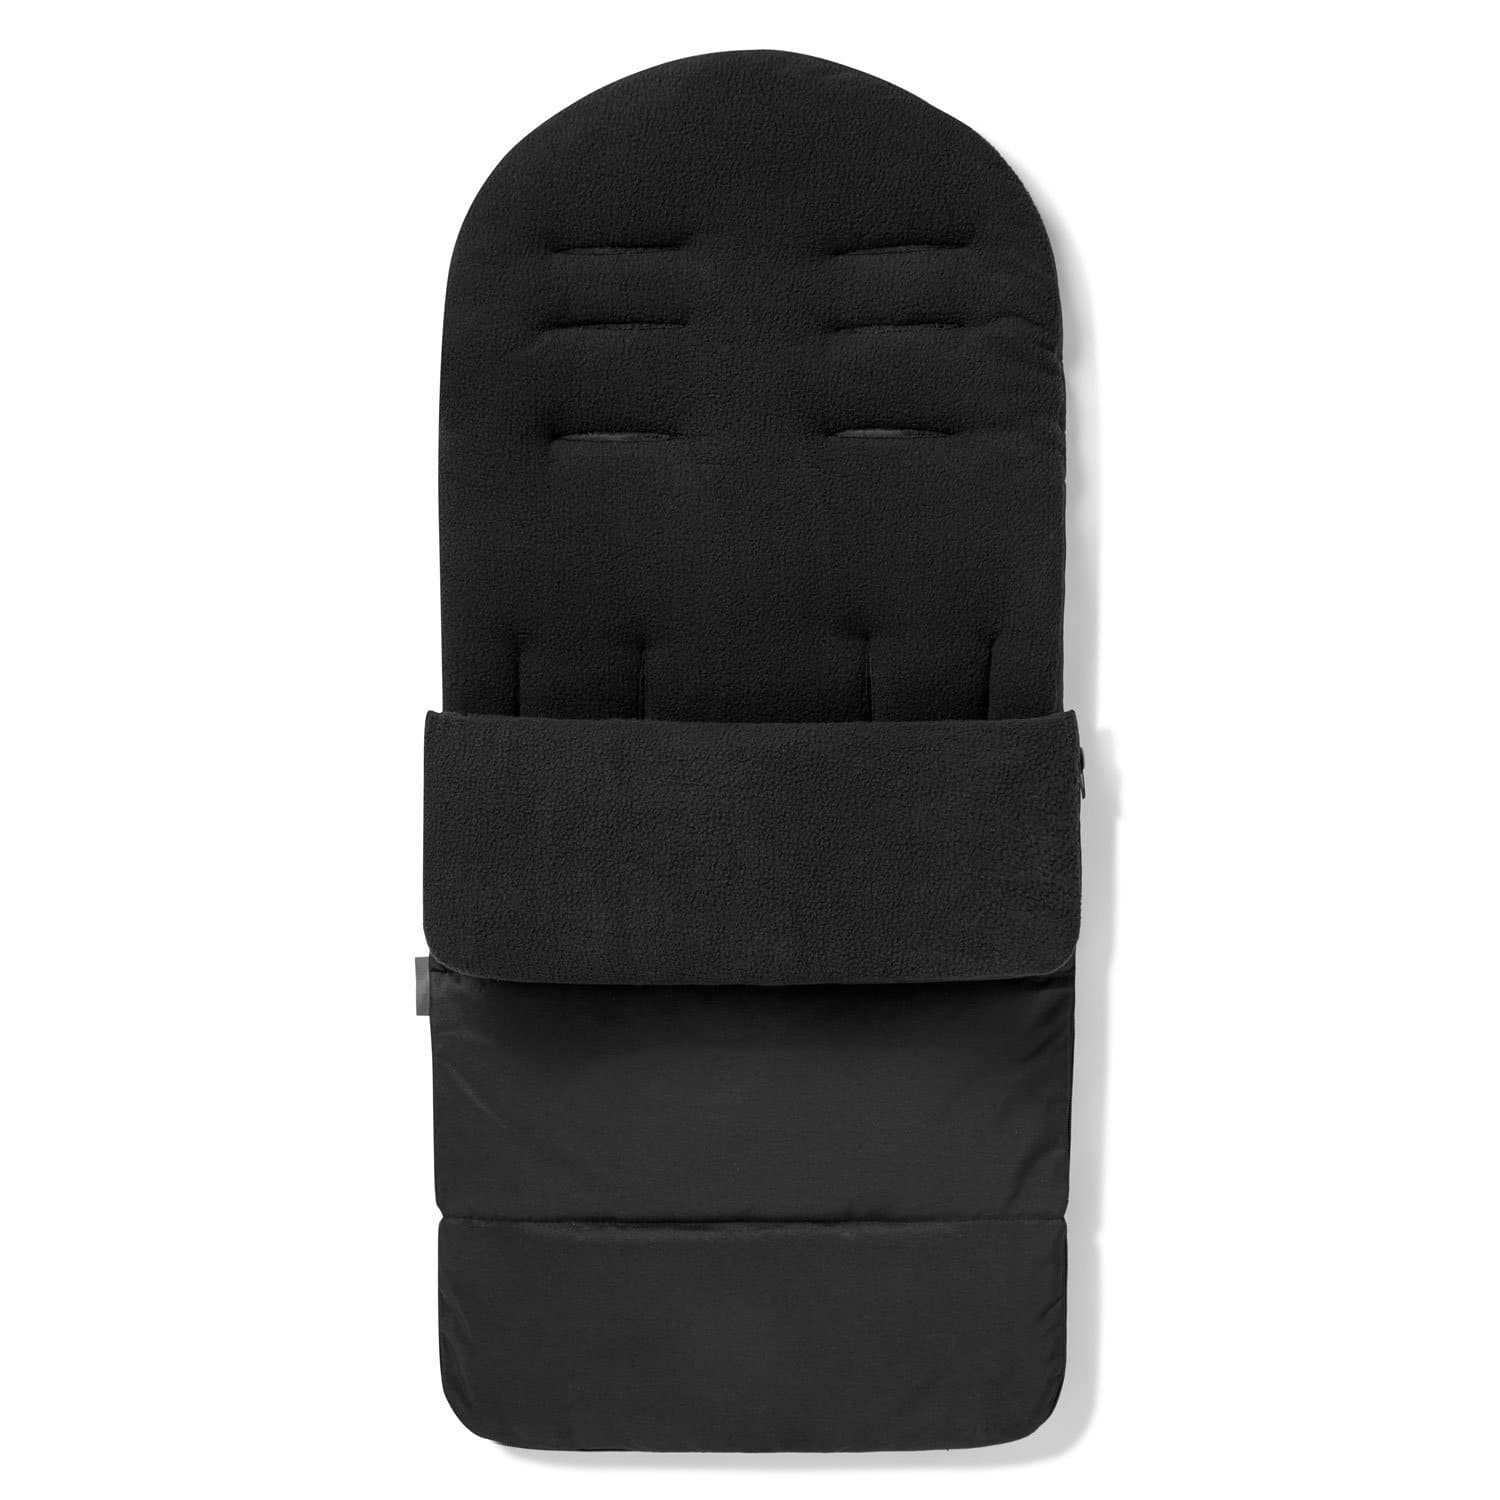 Premium Footmuff / Cosy Toes Compatible with Mountain Buggy - Black Jack / Fits All Models | For Your Little One